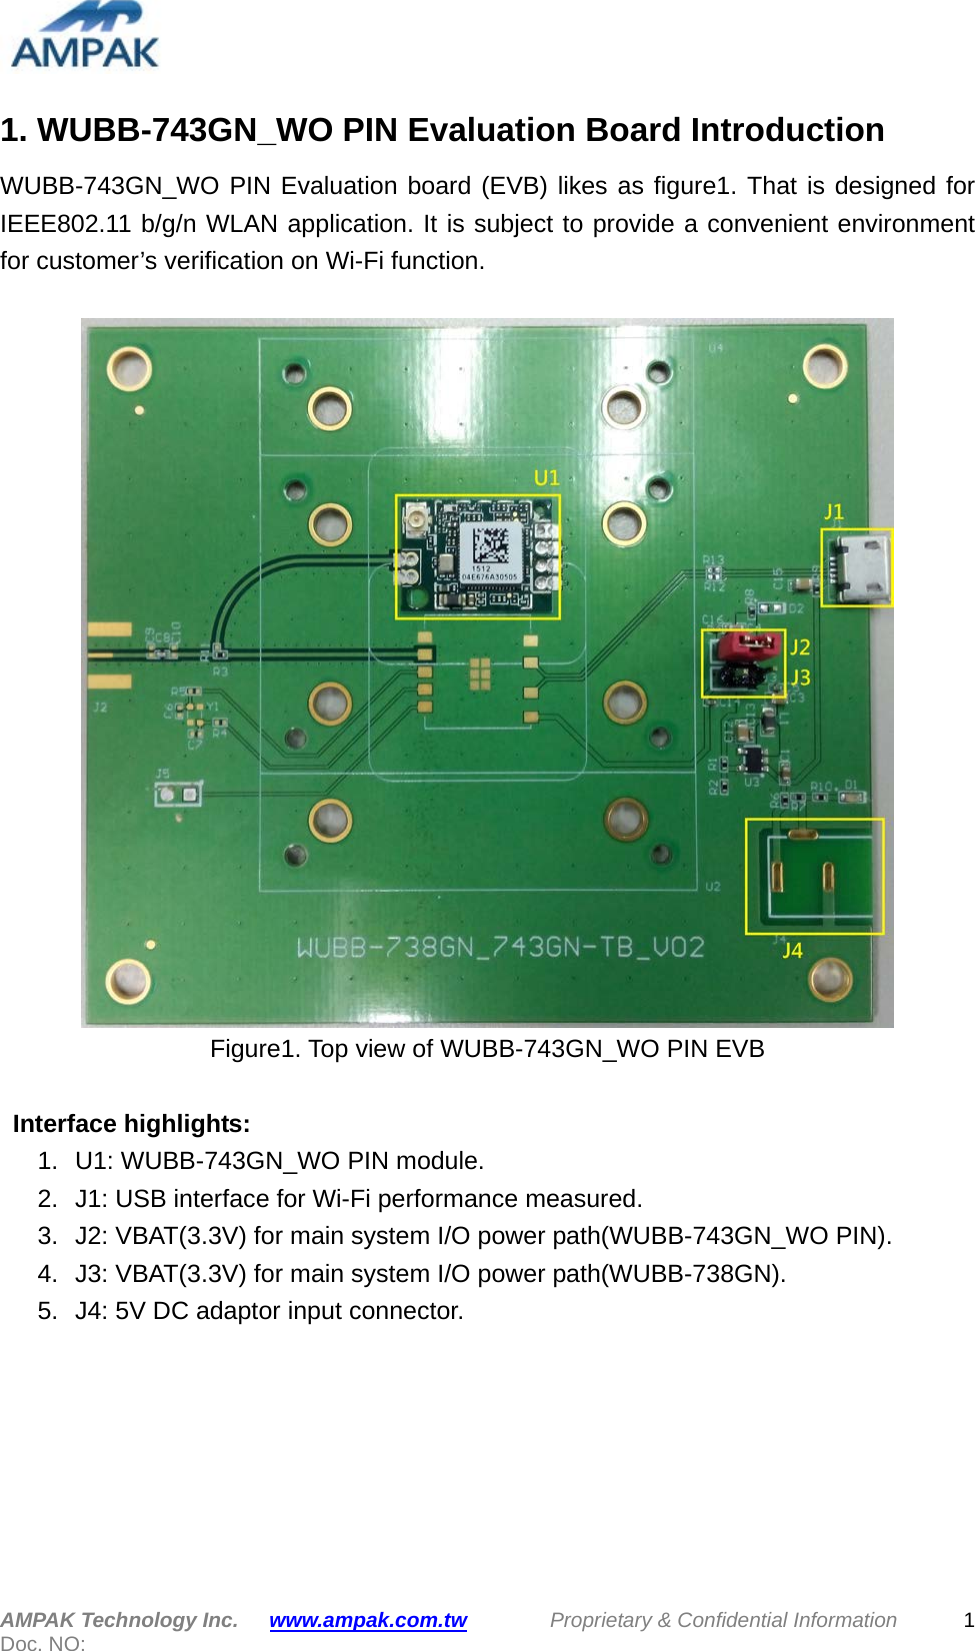  1. WUBB-743GN_WO PIN Evaluation Board Introduction WUBB-743GN_WO PIN Evaluation board (EVB) likes as figure1. That is designed for IEEE802.11 b/g/n WLAN application. It is subject to provide a convenient environment for customer’s verification on Wi-Fi function.     Figure1. Top view of WUBB-743GN_WO PIN EVB   Interface highlights: 1.  U1: WUBB-743GN_WO PIN module. 2. J1: USB interface for Wi-Fi performance measured. 3. J2: VBAT(3.3V) for main system I/O power path(WUBB-743GN_WO PIN). 4.  J3: VBAT(3.3V) for main system I/O power path(WUBB-738GN). 5.  J4: 5V DC adaptor input connector.         AMPAK Technology Inc.   www.ampak.com.tw        Proprietary &amp; Confidential Information  Doc. NO:   1 